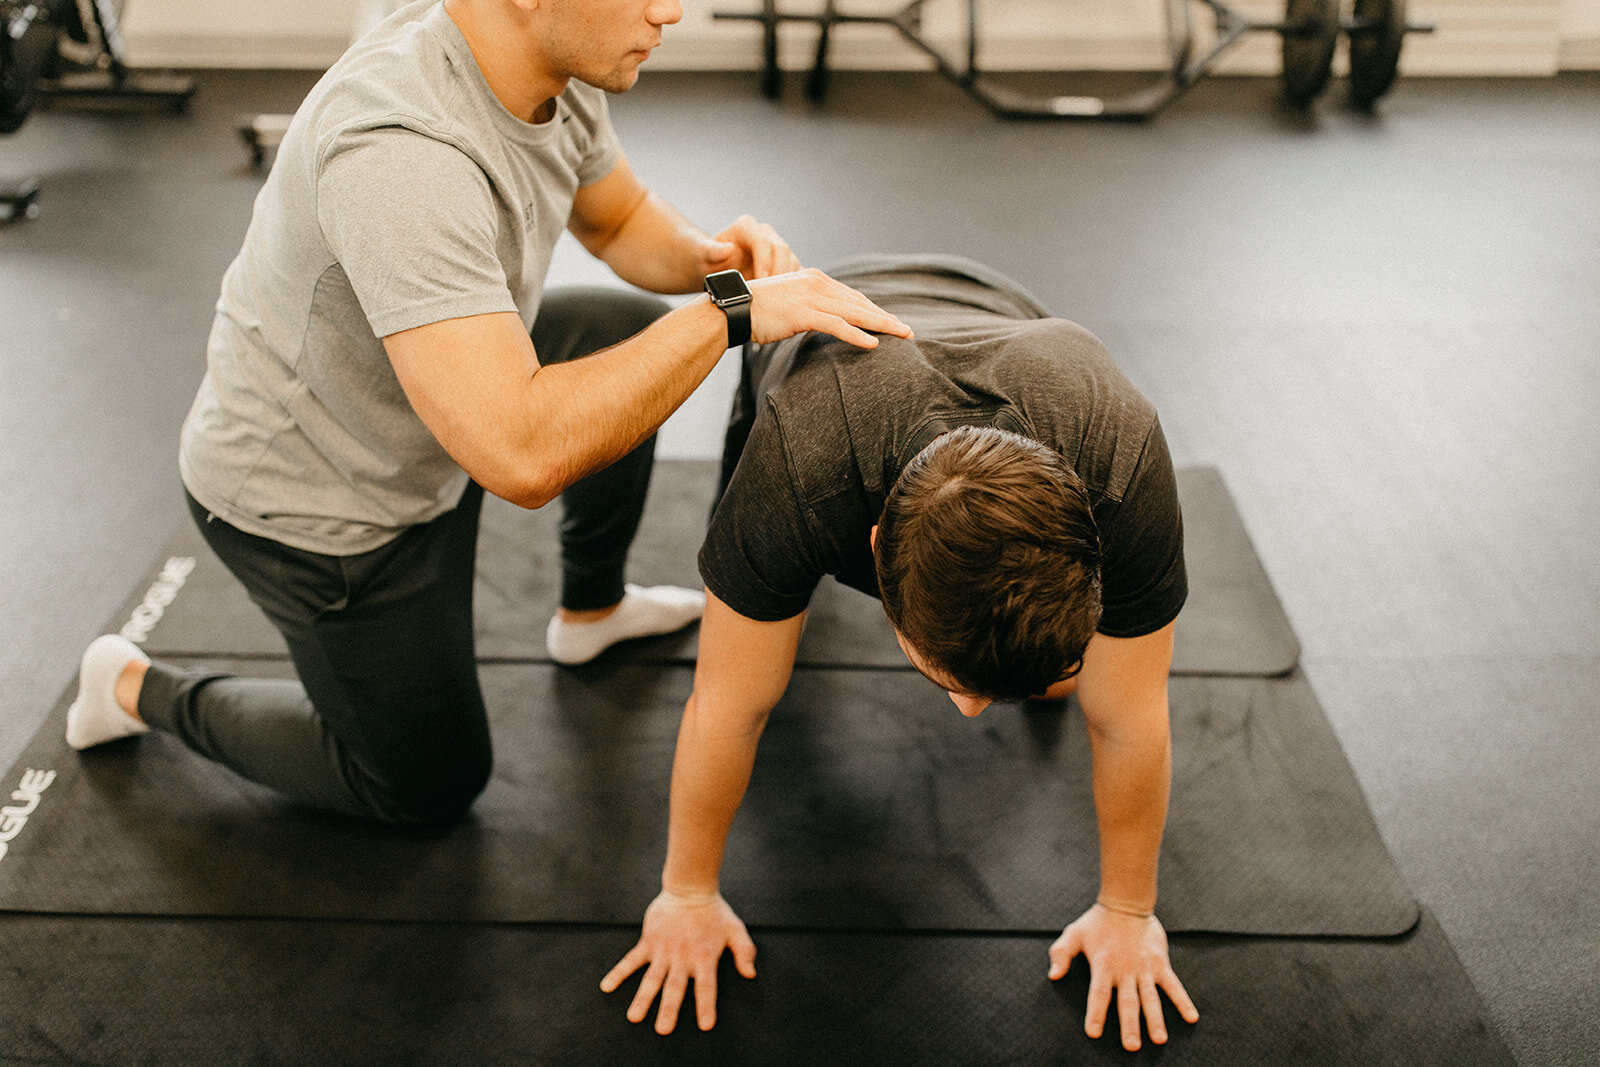 A Mobility Specialist at Northwest Spine and Sport helping a patient engage in a lower back stretch.